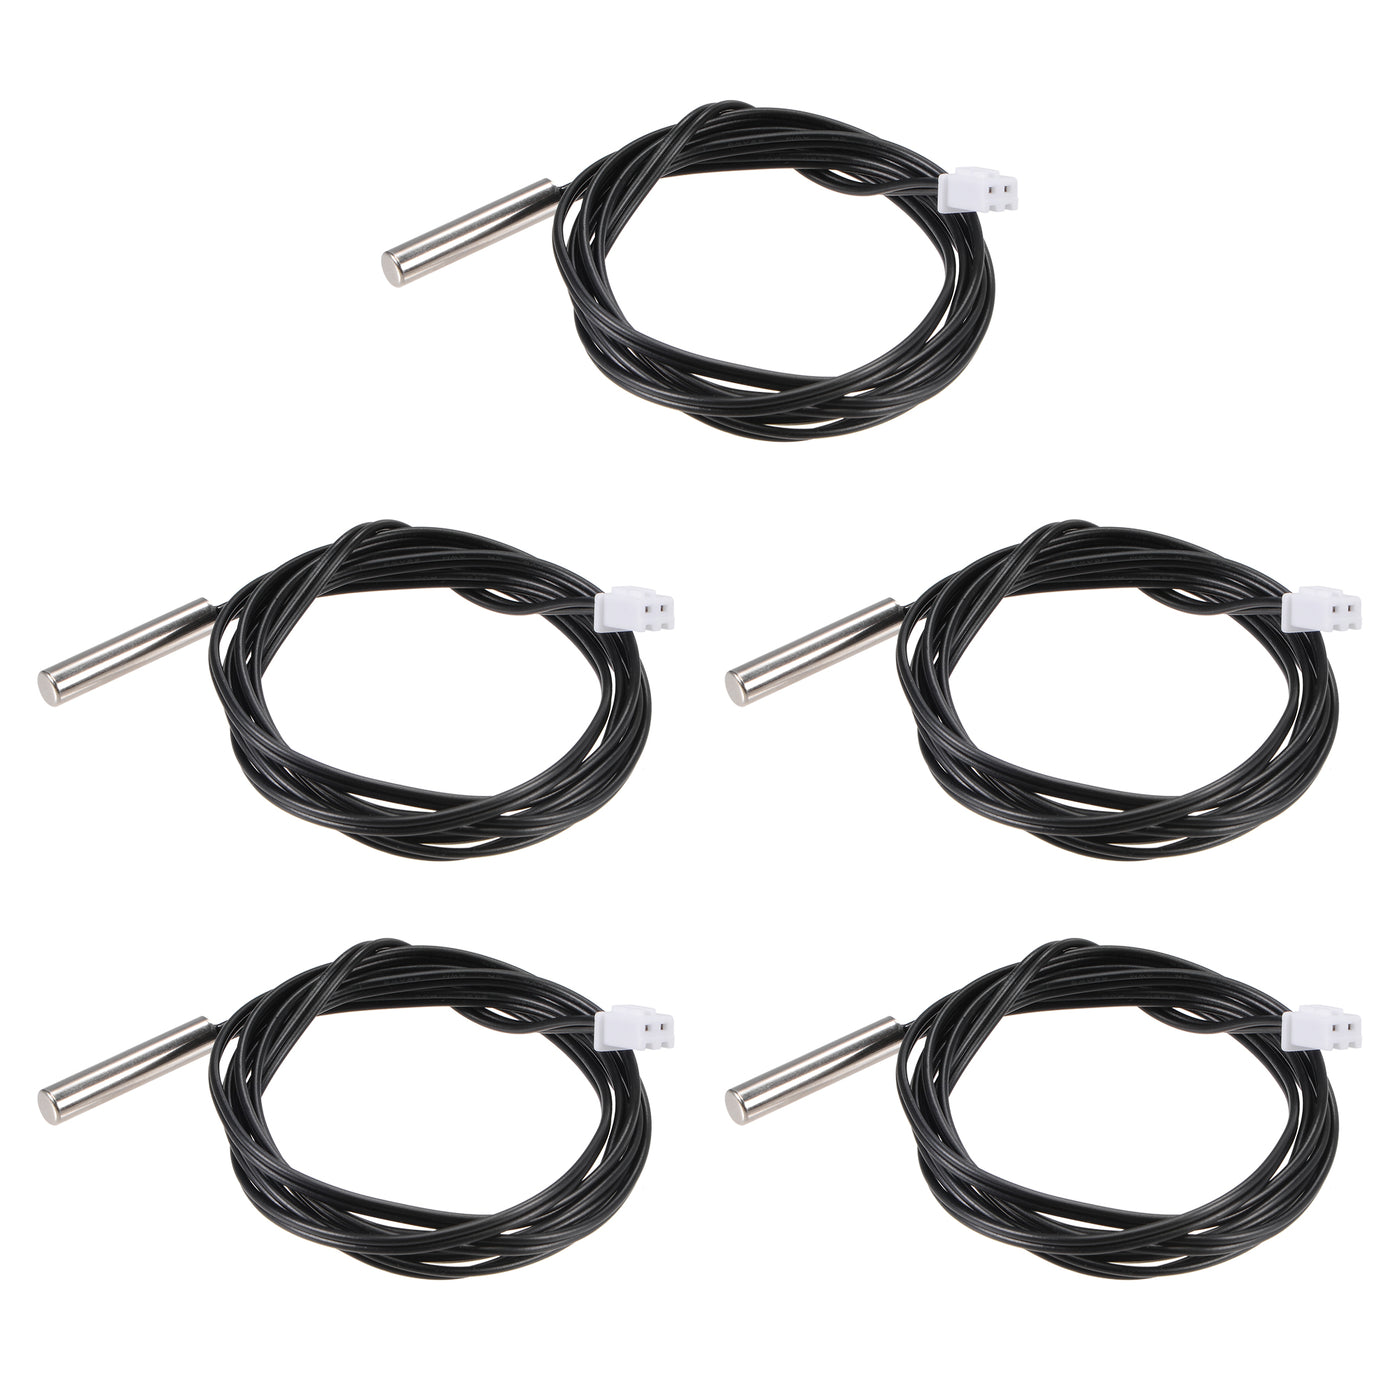 uxcell Uxcell 5pcs 20K Temperature Sensor Probe, Stainless Steel NTC Thermal Sensor Probe 3.3ft Digital Thermometer Extension Cable